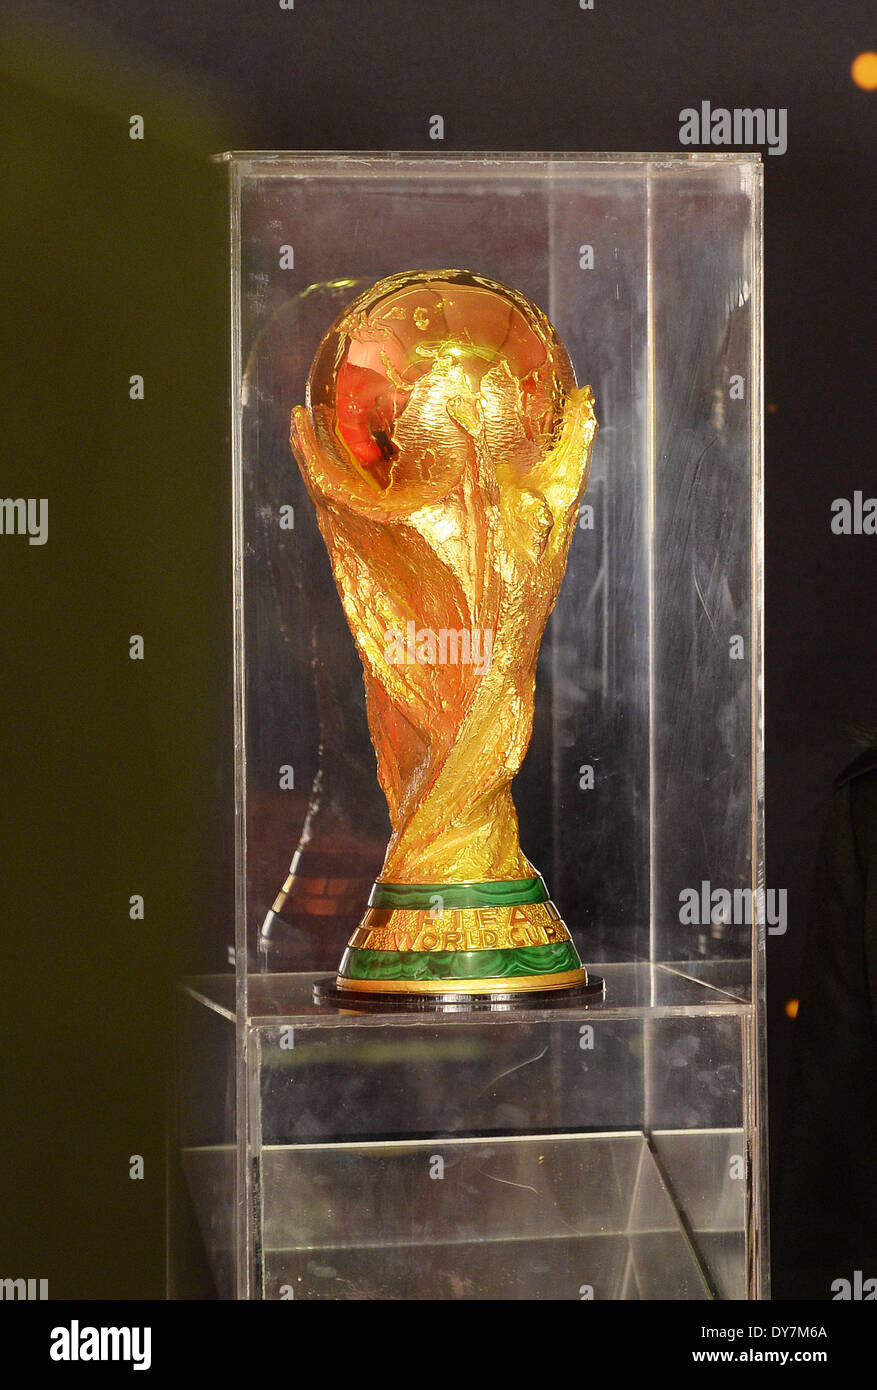 Shanghai. 9th Apr, 2014. The FIFA World Cup trophy is on display in Shanghai, east China, April 9, 2014, as part of its world tour ahead of the Brazil 2014 World Cup finals this summer. © Lai Xinlin/Xinhua/Alamy Live News Stock Photo